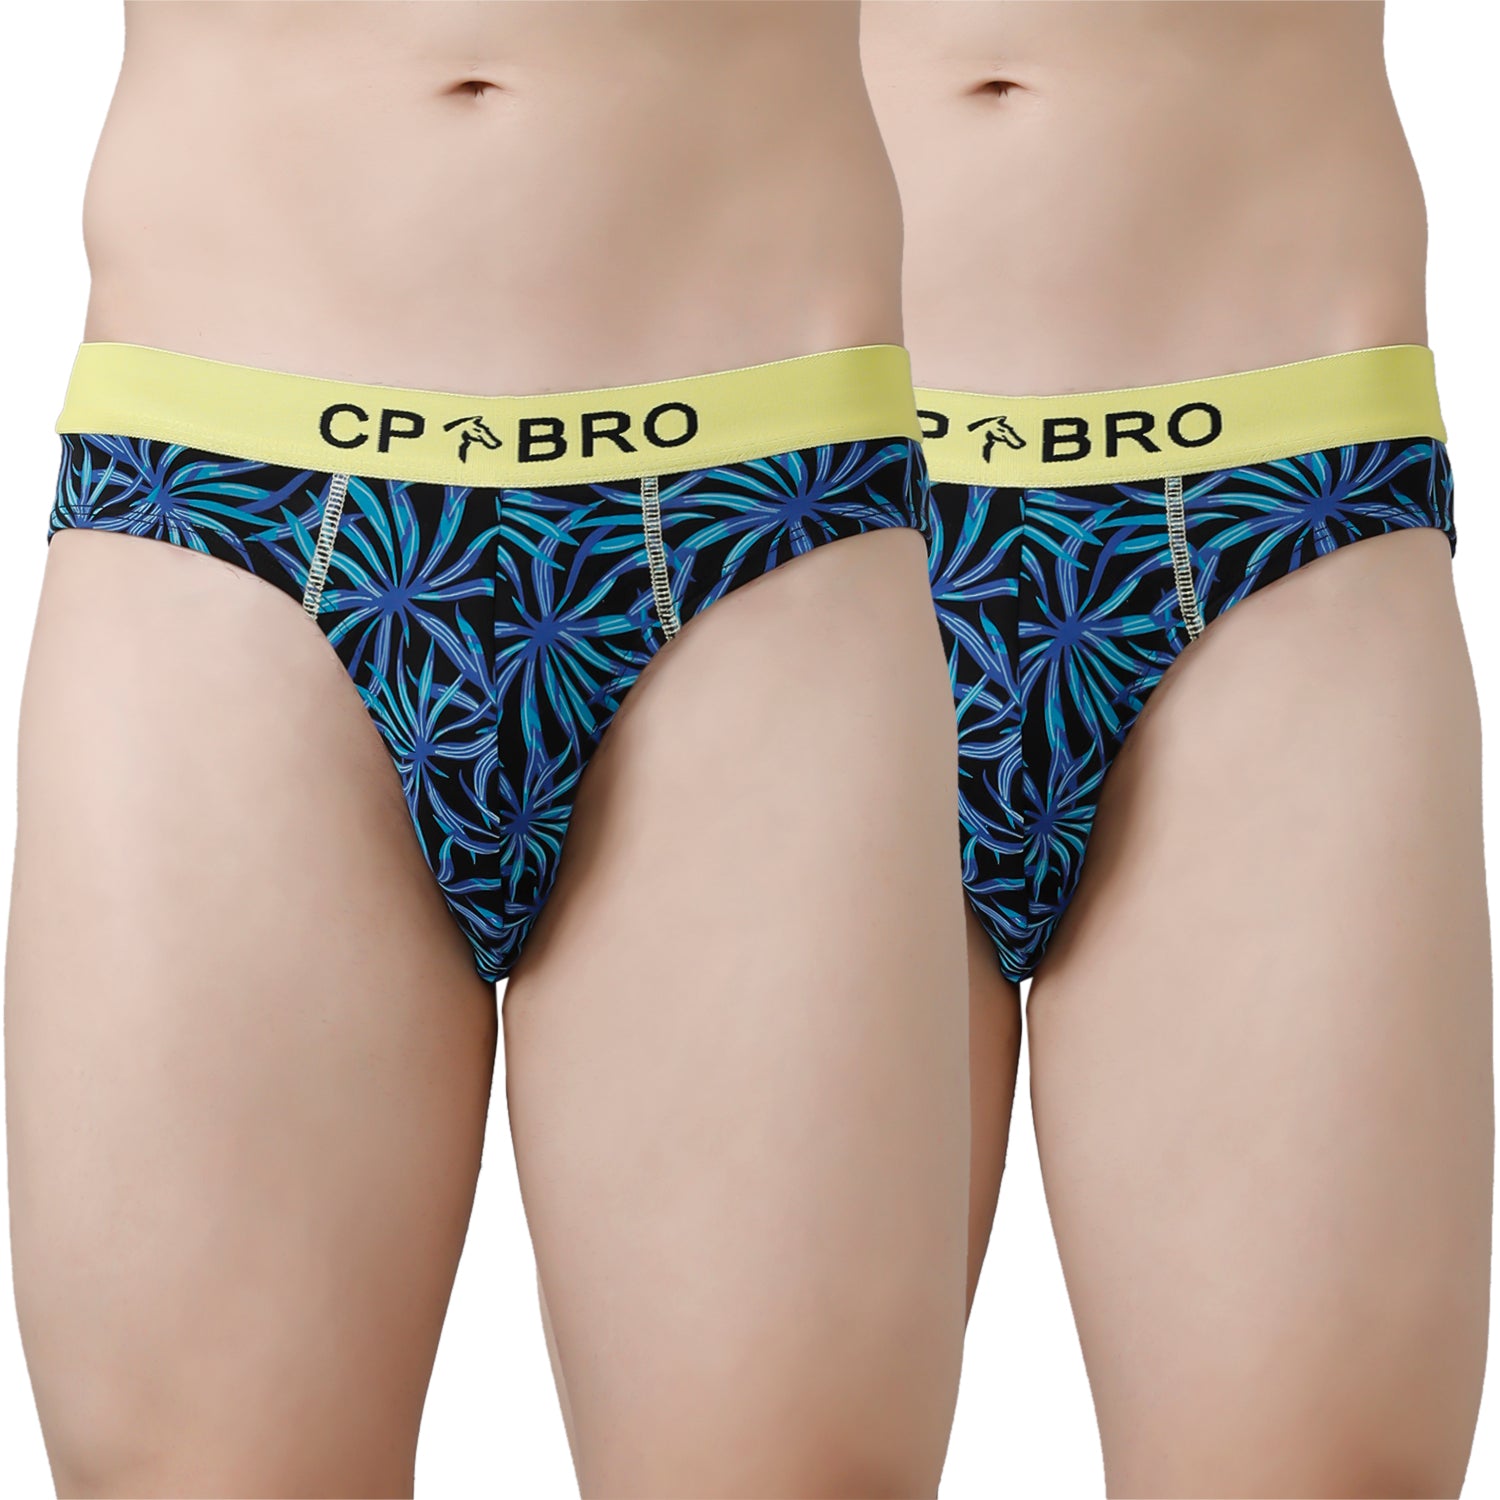 CP BRO Men's Printed Briefs with Exposed Waistband Value Pack - Blue Leaf & Blue Leaf (Pack of 2)